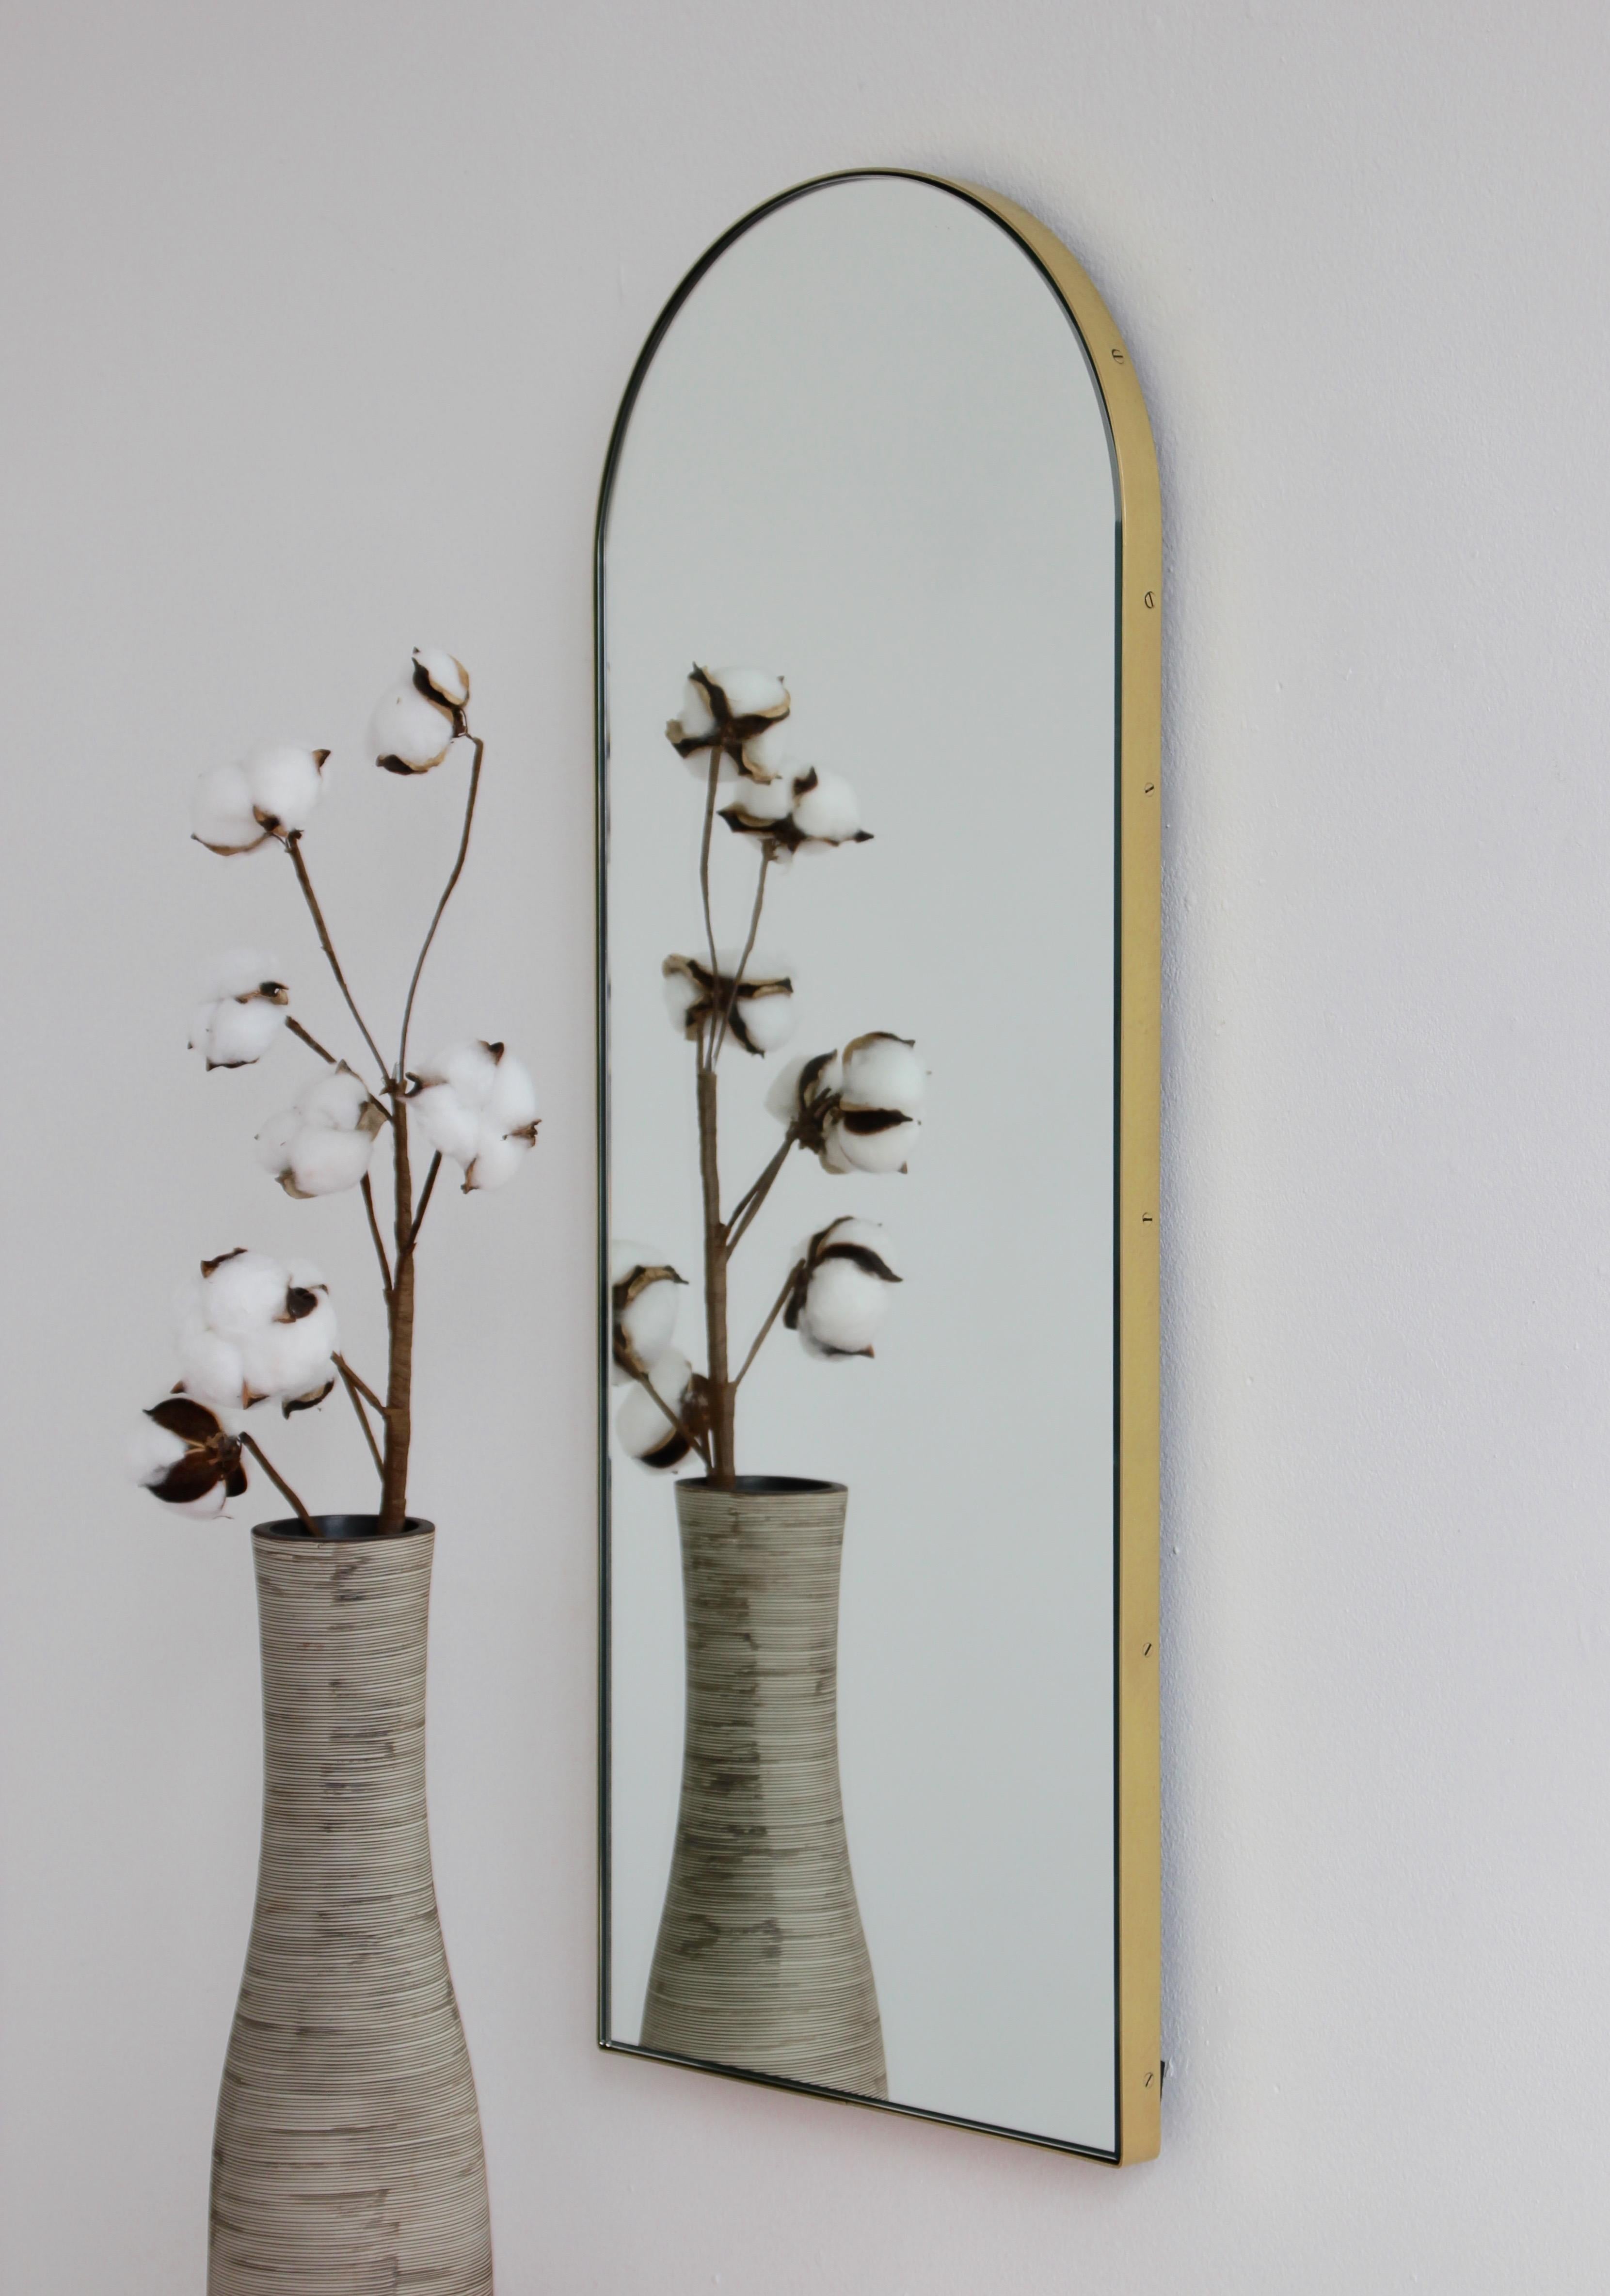 Delightful Arcus™ arch shaped mirror with an elegant solid brushed brass frame. Designed and handcrafted in London, UK.

Our mirrors are designed with an integrated French cleat (split batten) system that ensures the mirror is securely mounted flush